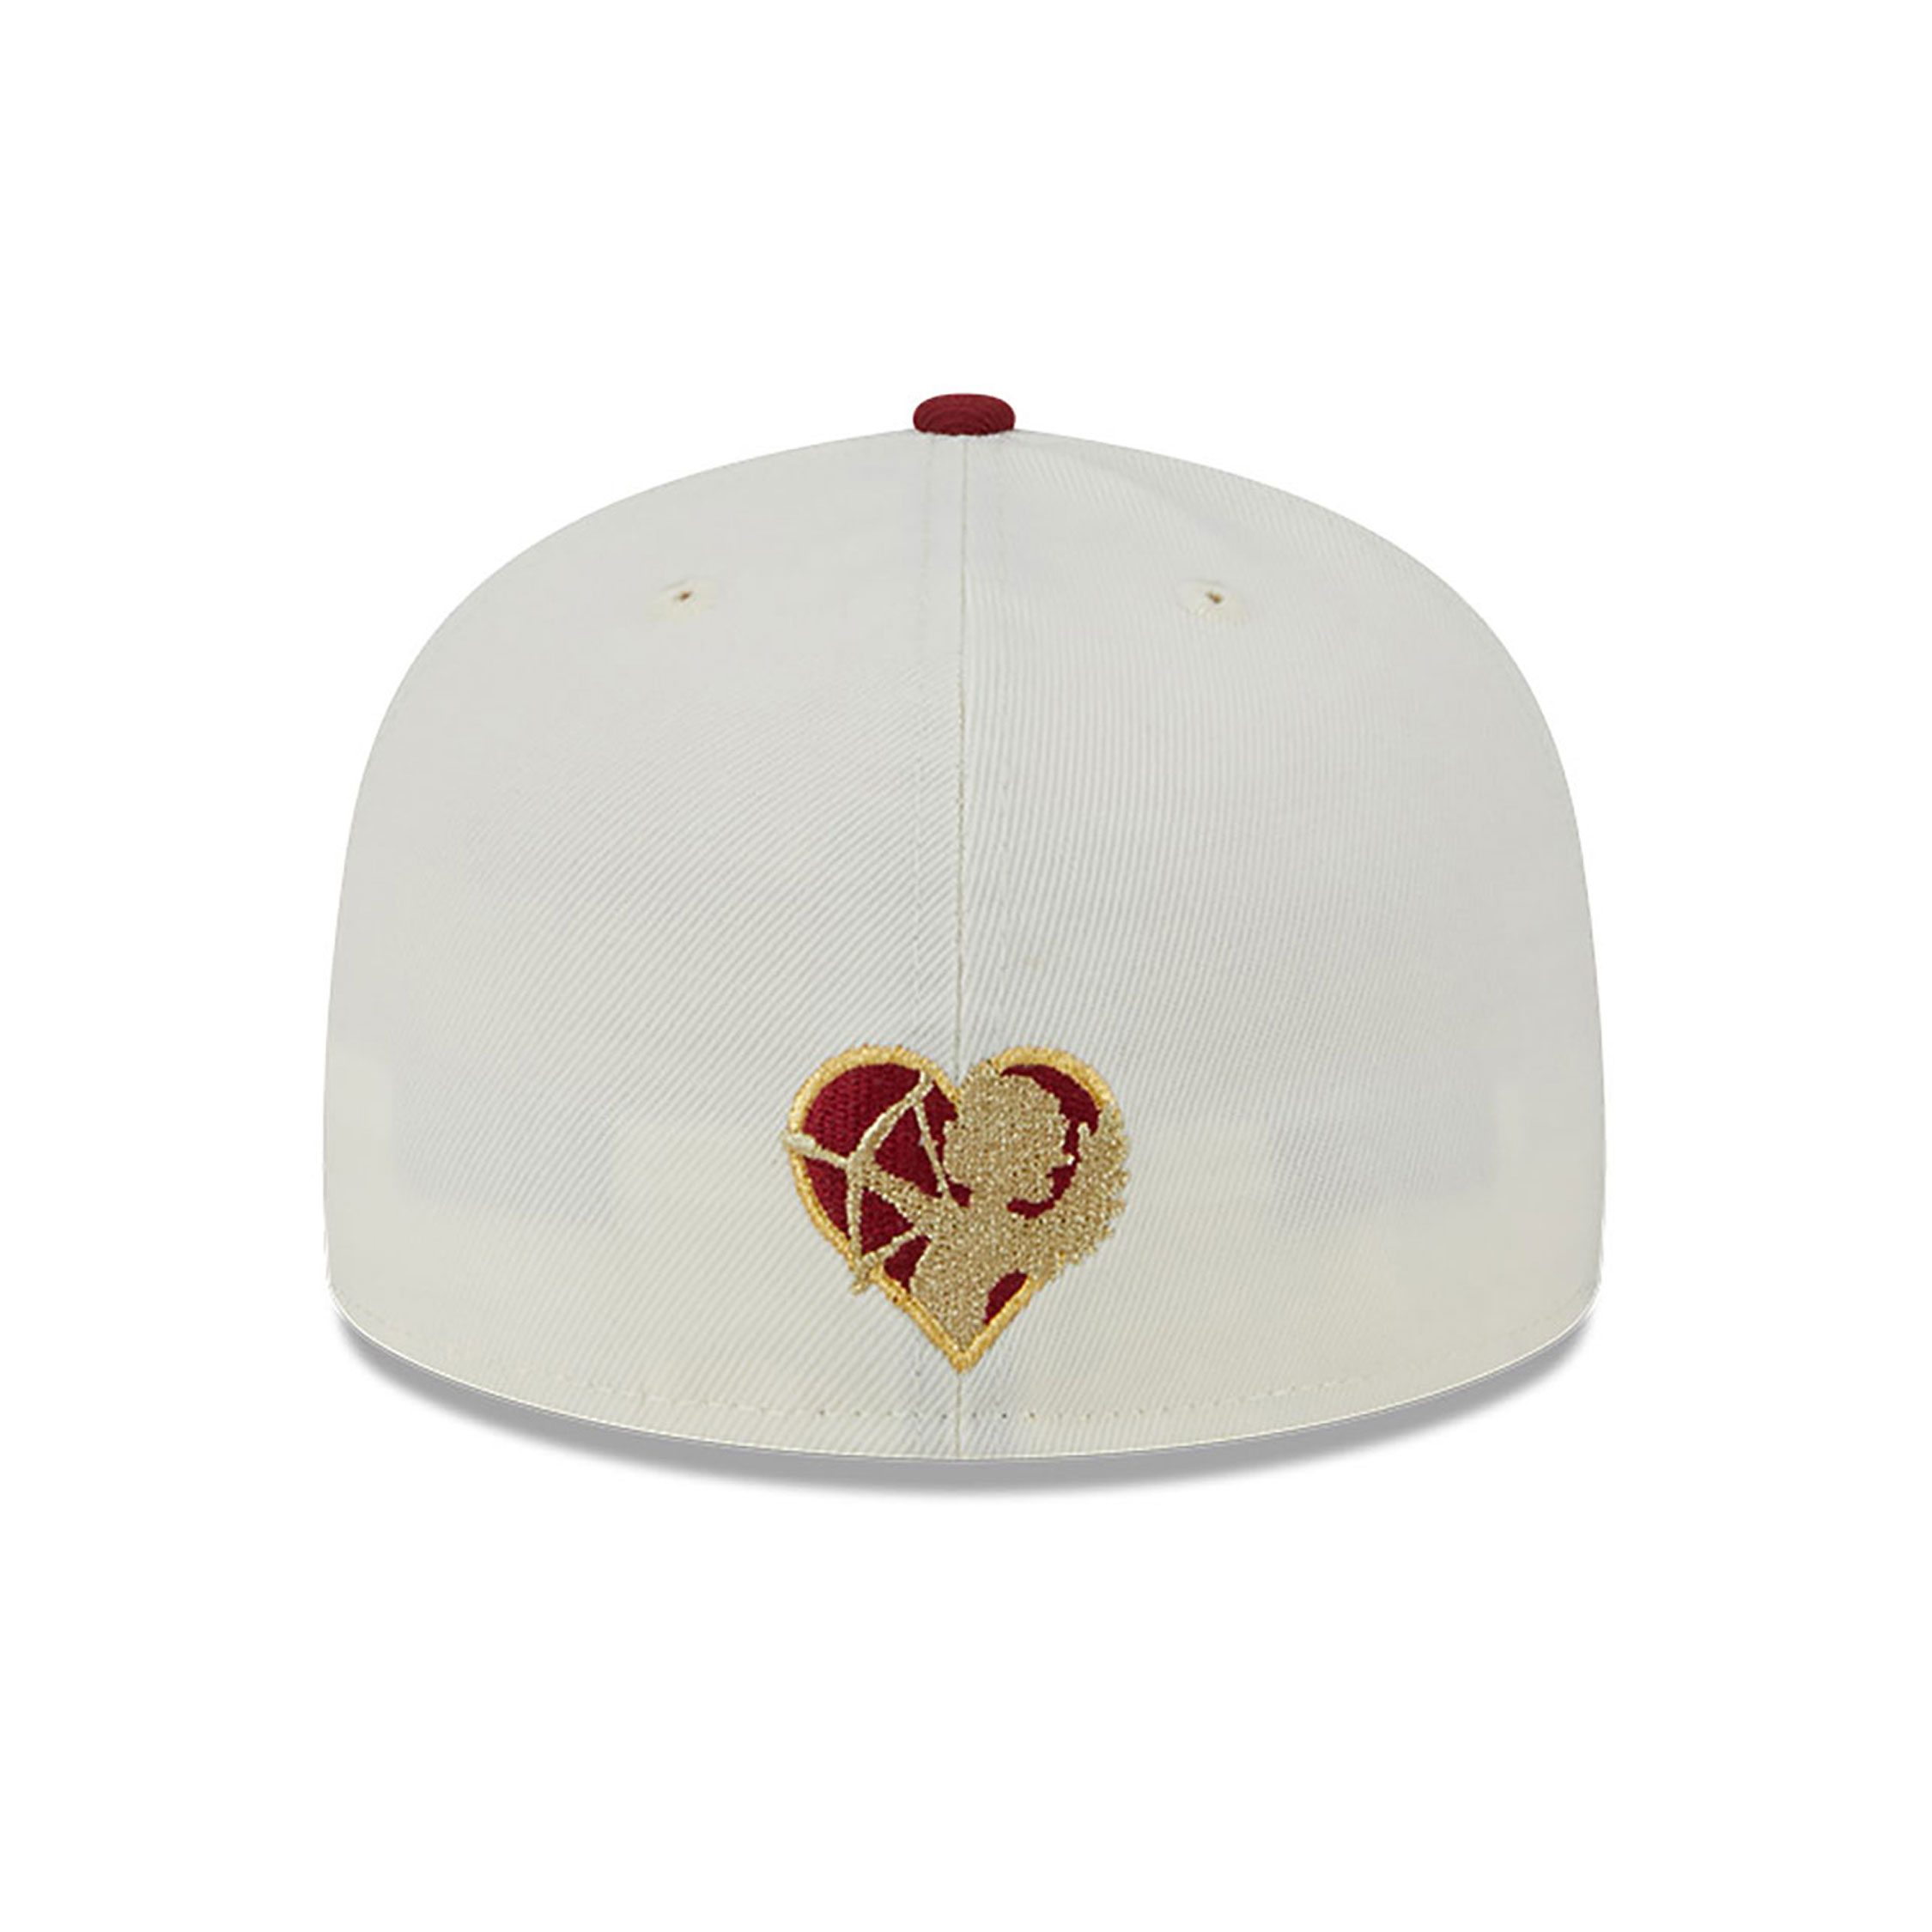 Philadelphia Phillies Be Mine White 59FIFTY Fitted Cap